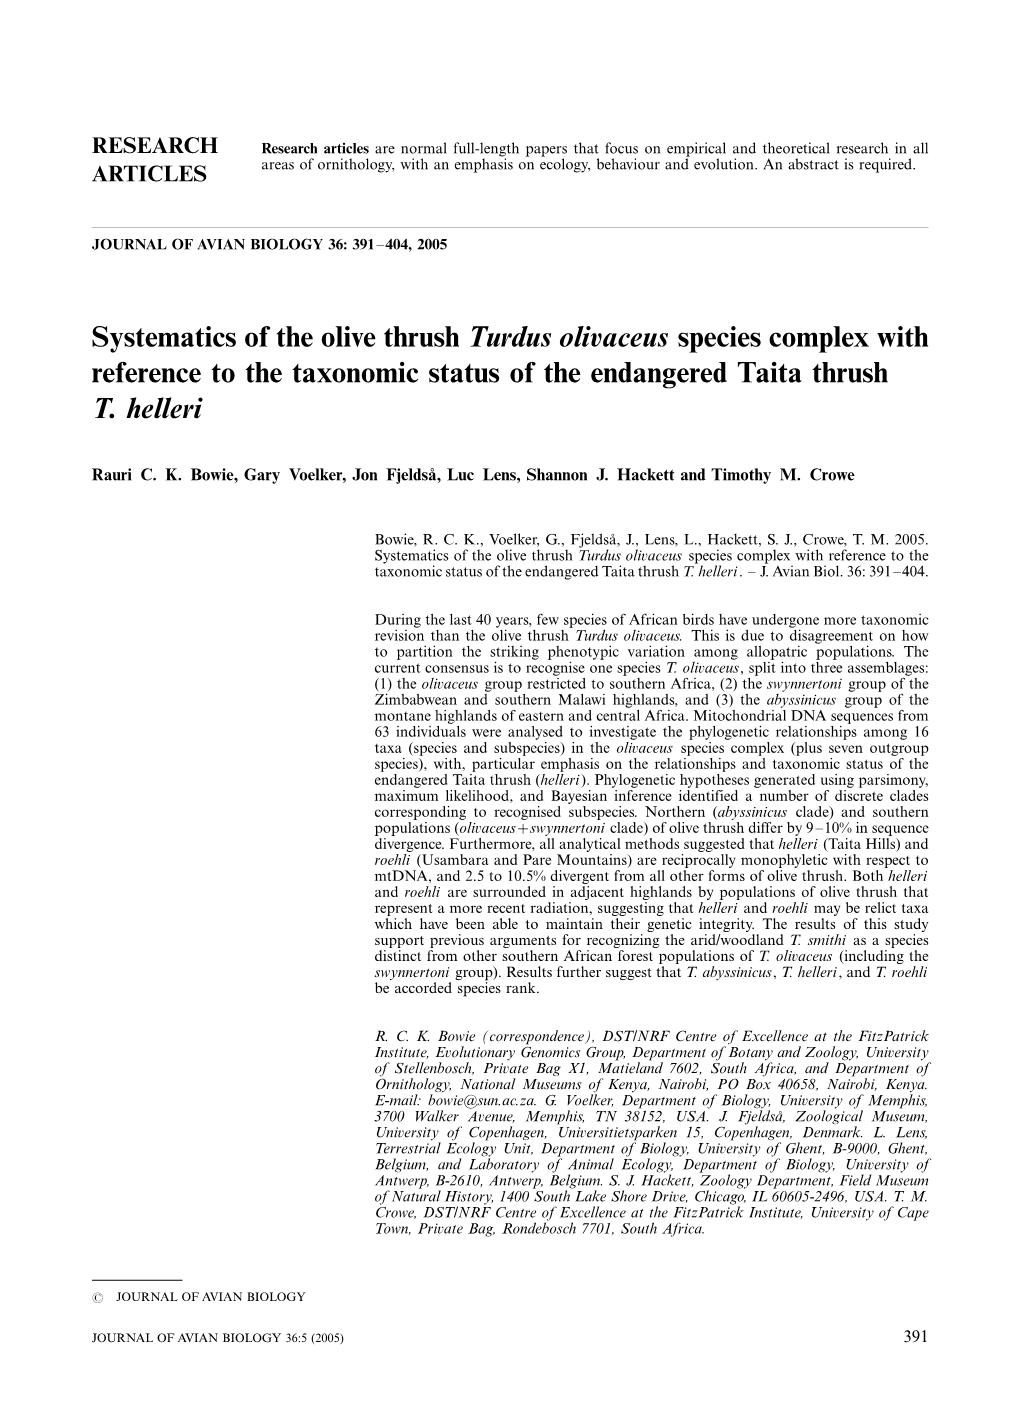 Systematics of the Olive Thrush Turdus Olivaceus Species Complex with Reference to the Taxonomic Status of the Endangered Taita Thrush T